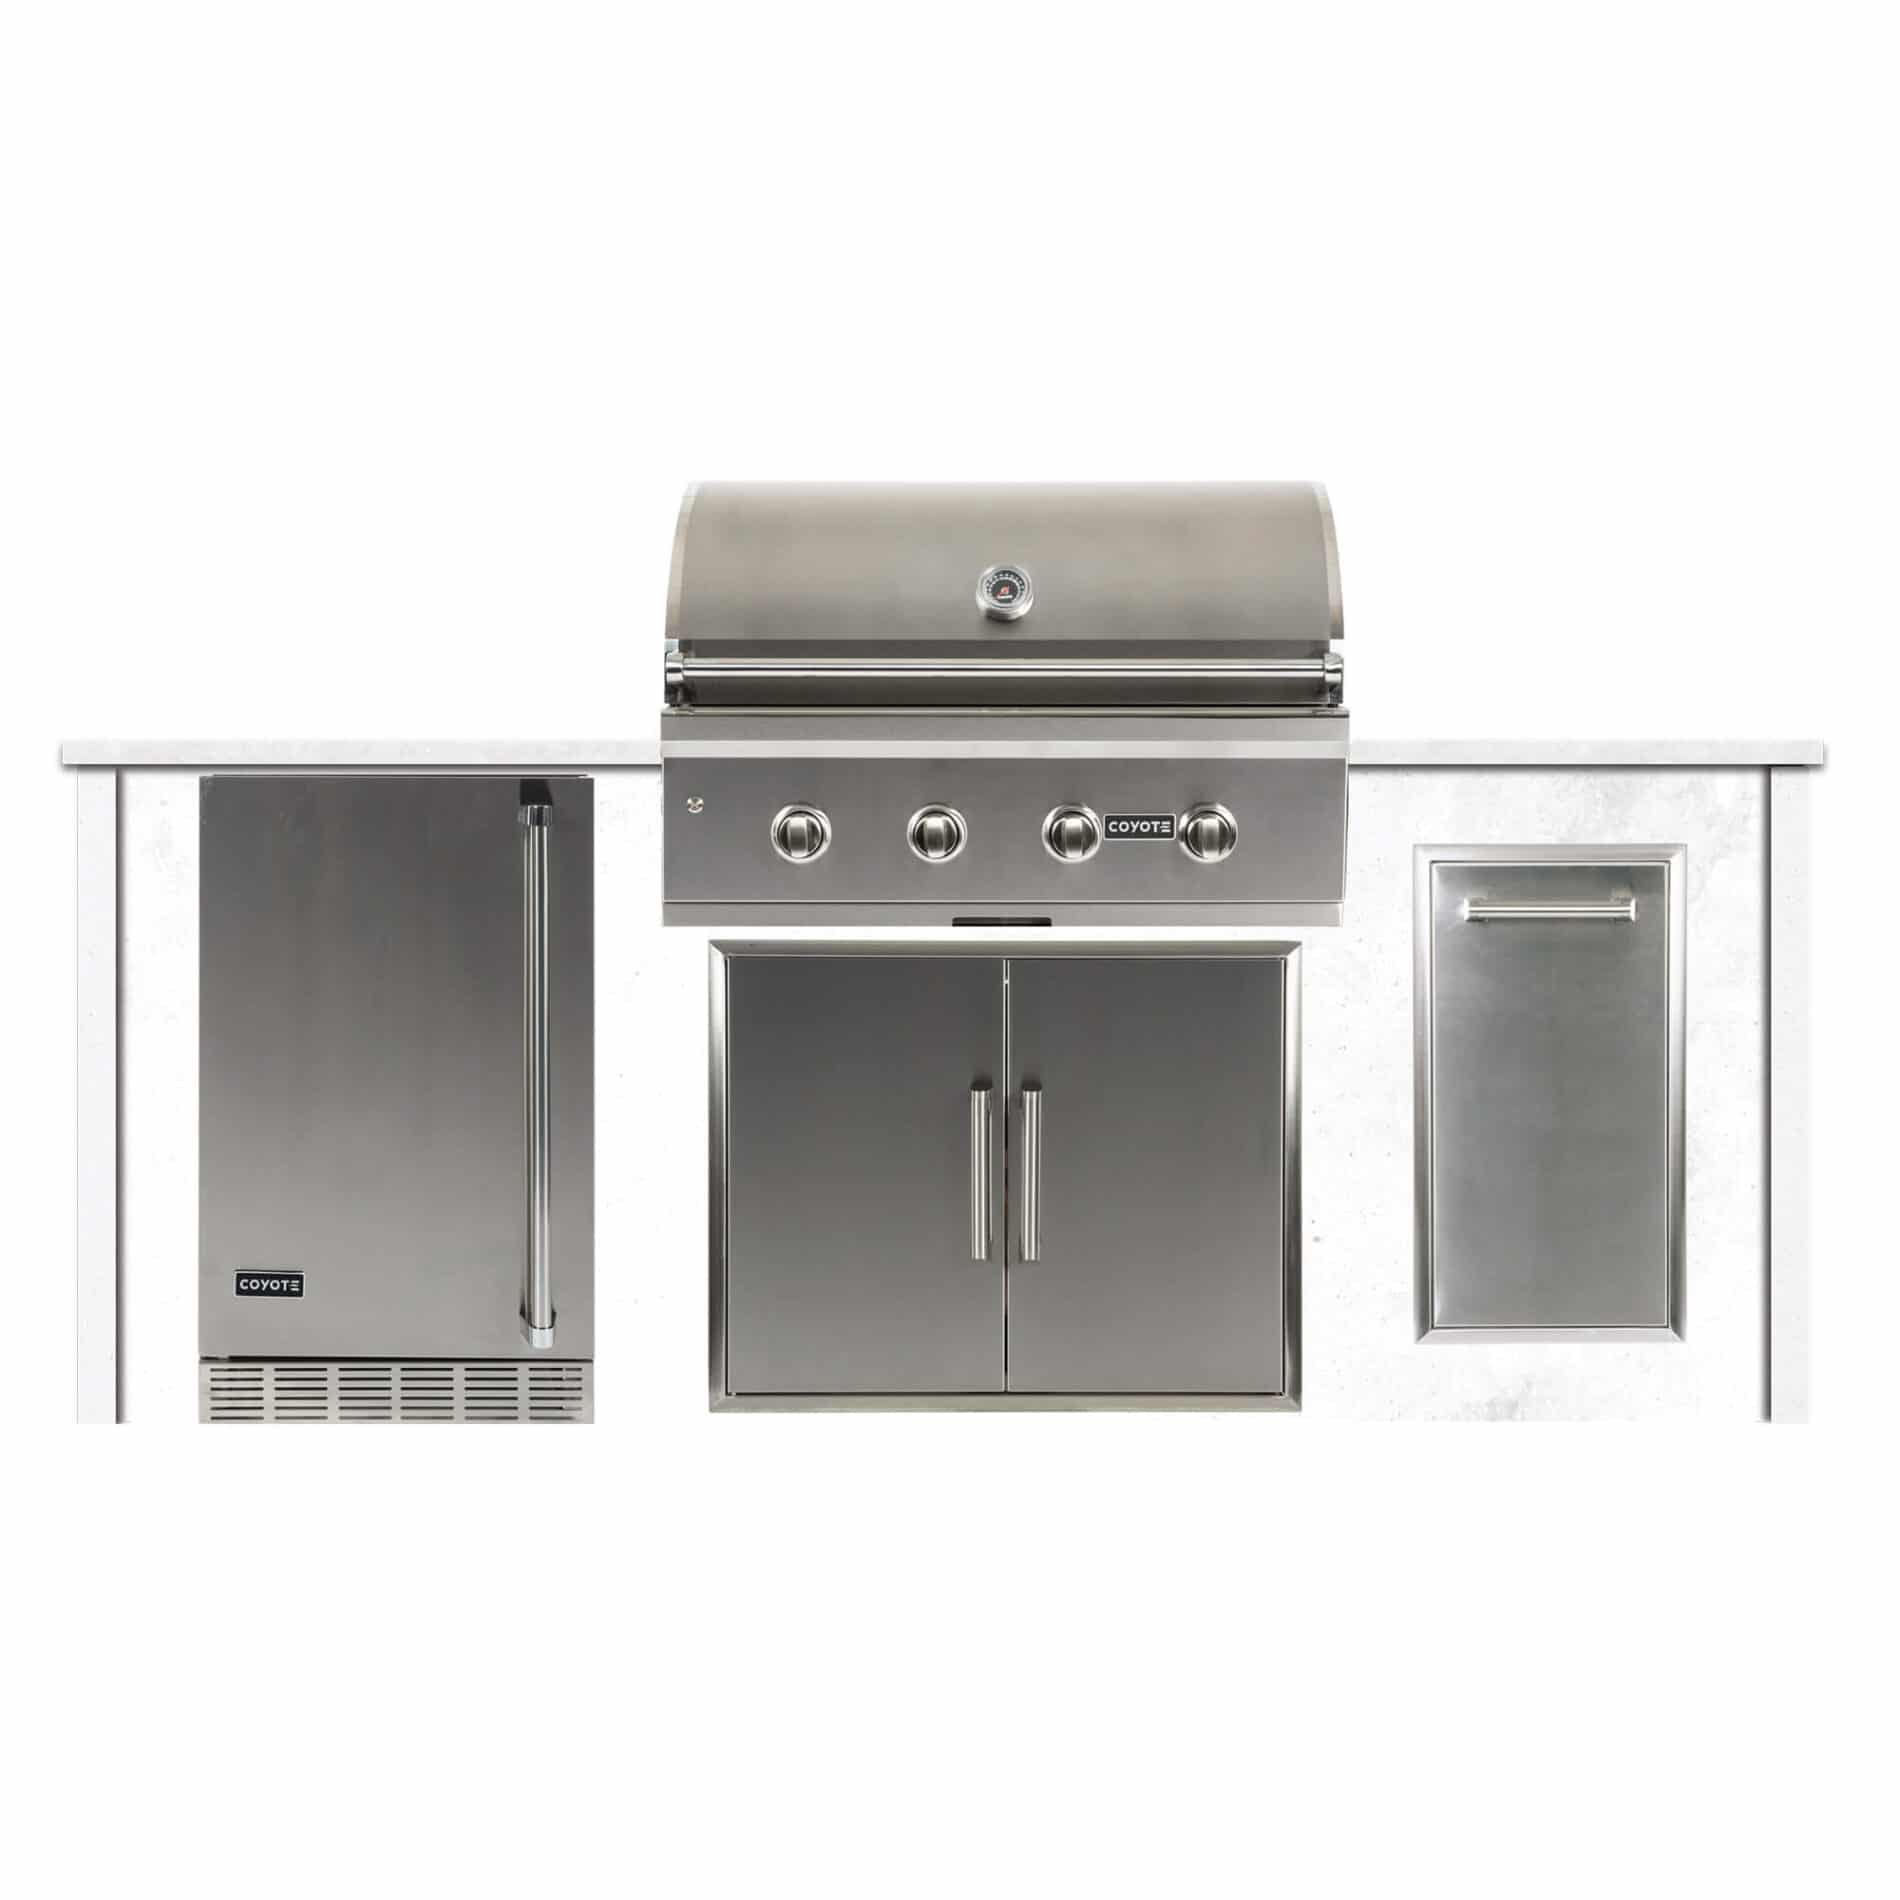 8 Pellet Grill Island Modern Concrete White Coyote Outdoor Living,Gas Dryer Vs Electric Dryer Cost